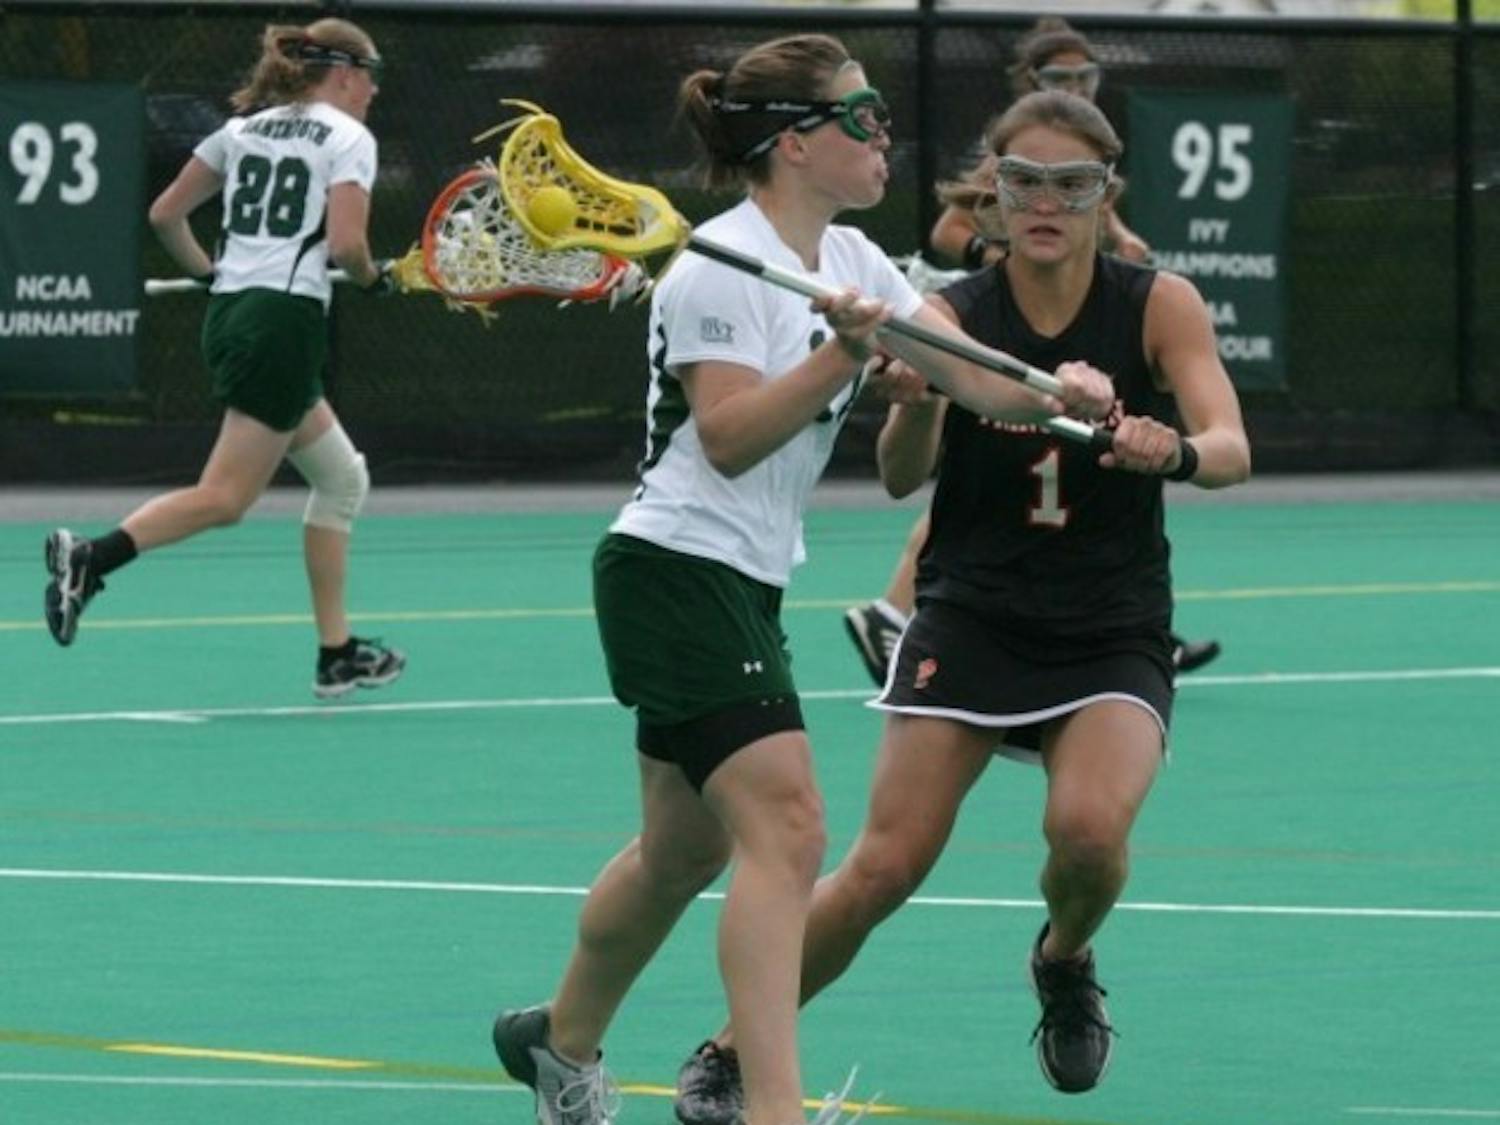 Women's lacrosse has gotten off to a lackluster start to its 2007 season after an appearance in last year's NCAA championship game.